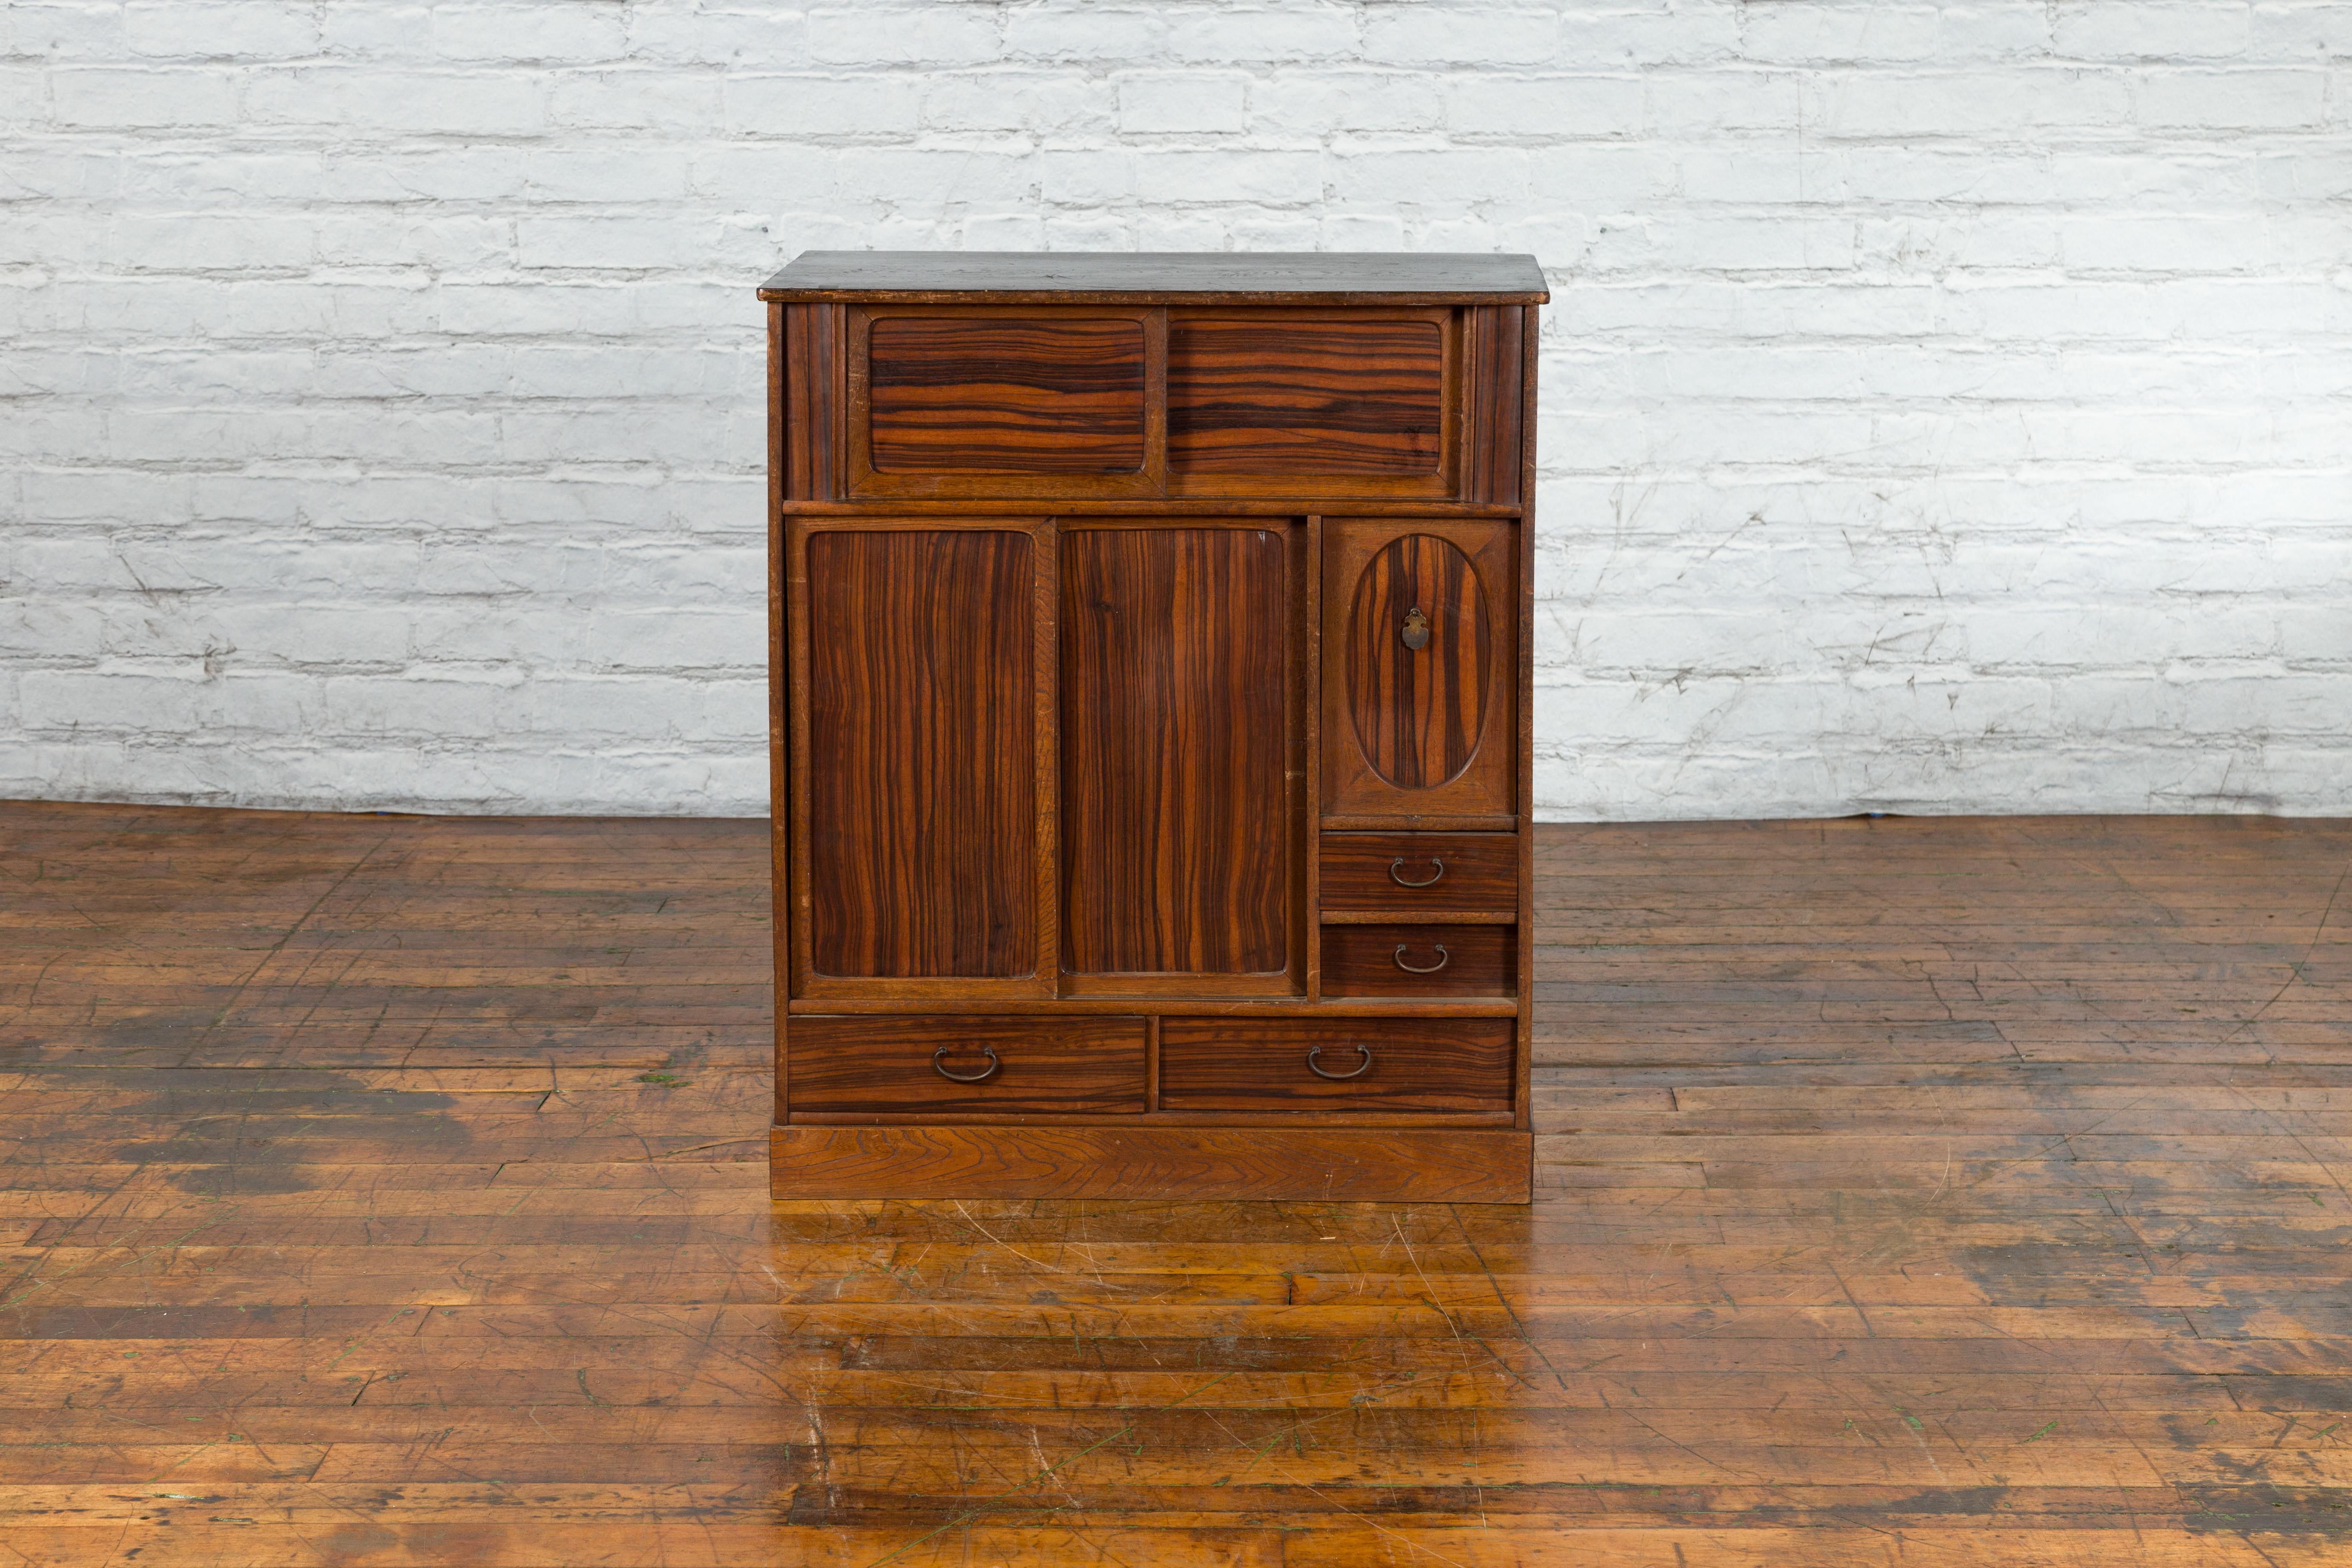 Japanese 19th Century Zebra Wood Cabinet with Sliding Doors, Panel and Drawers For Sale 8